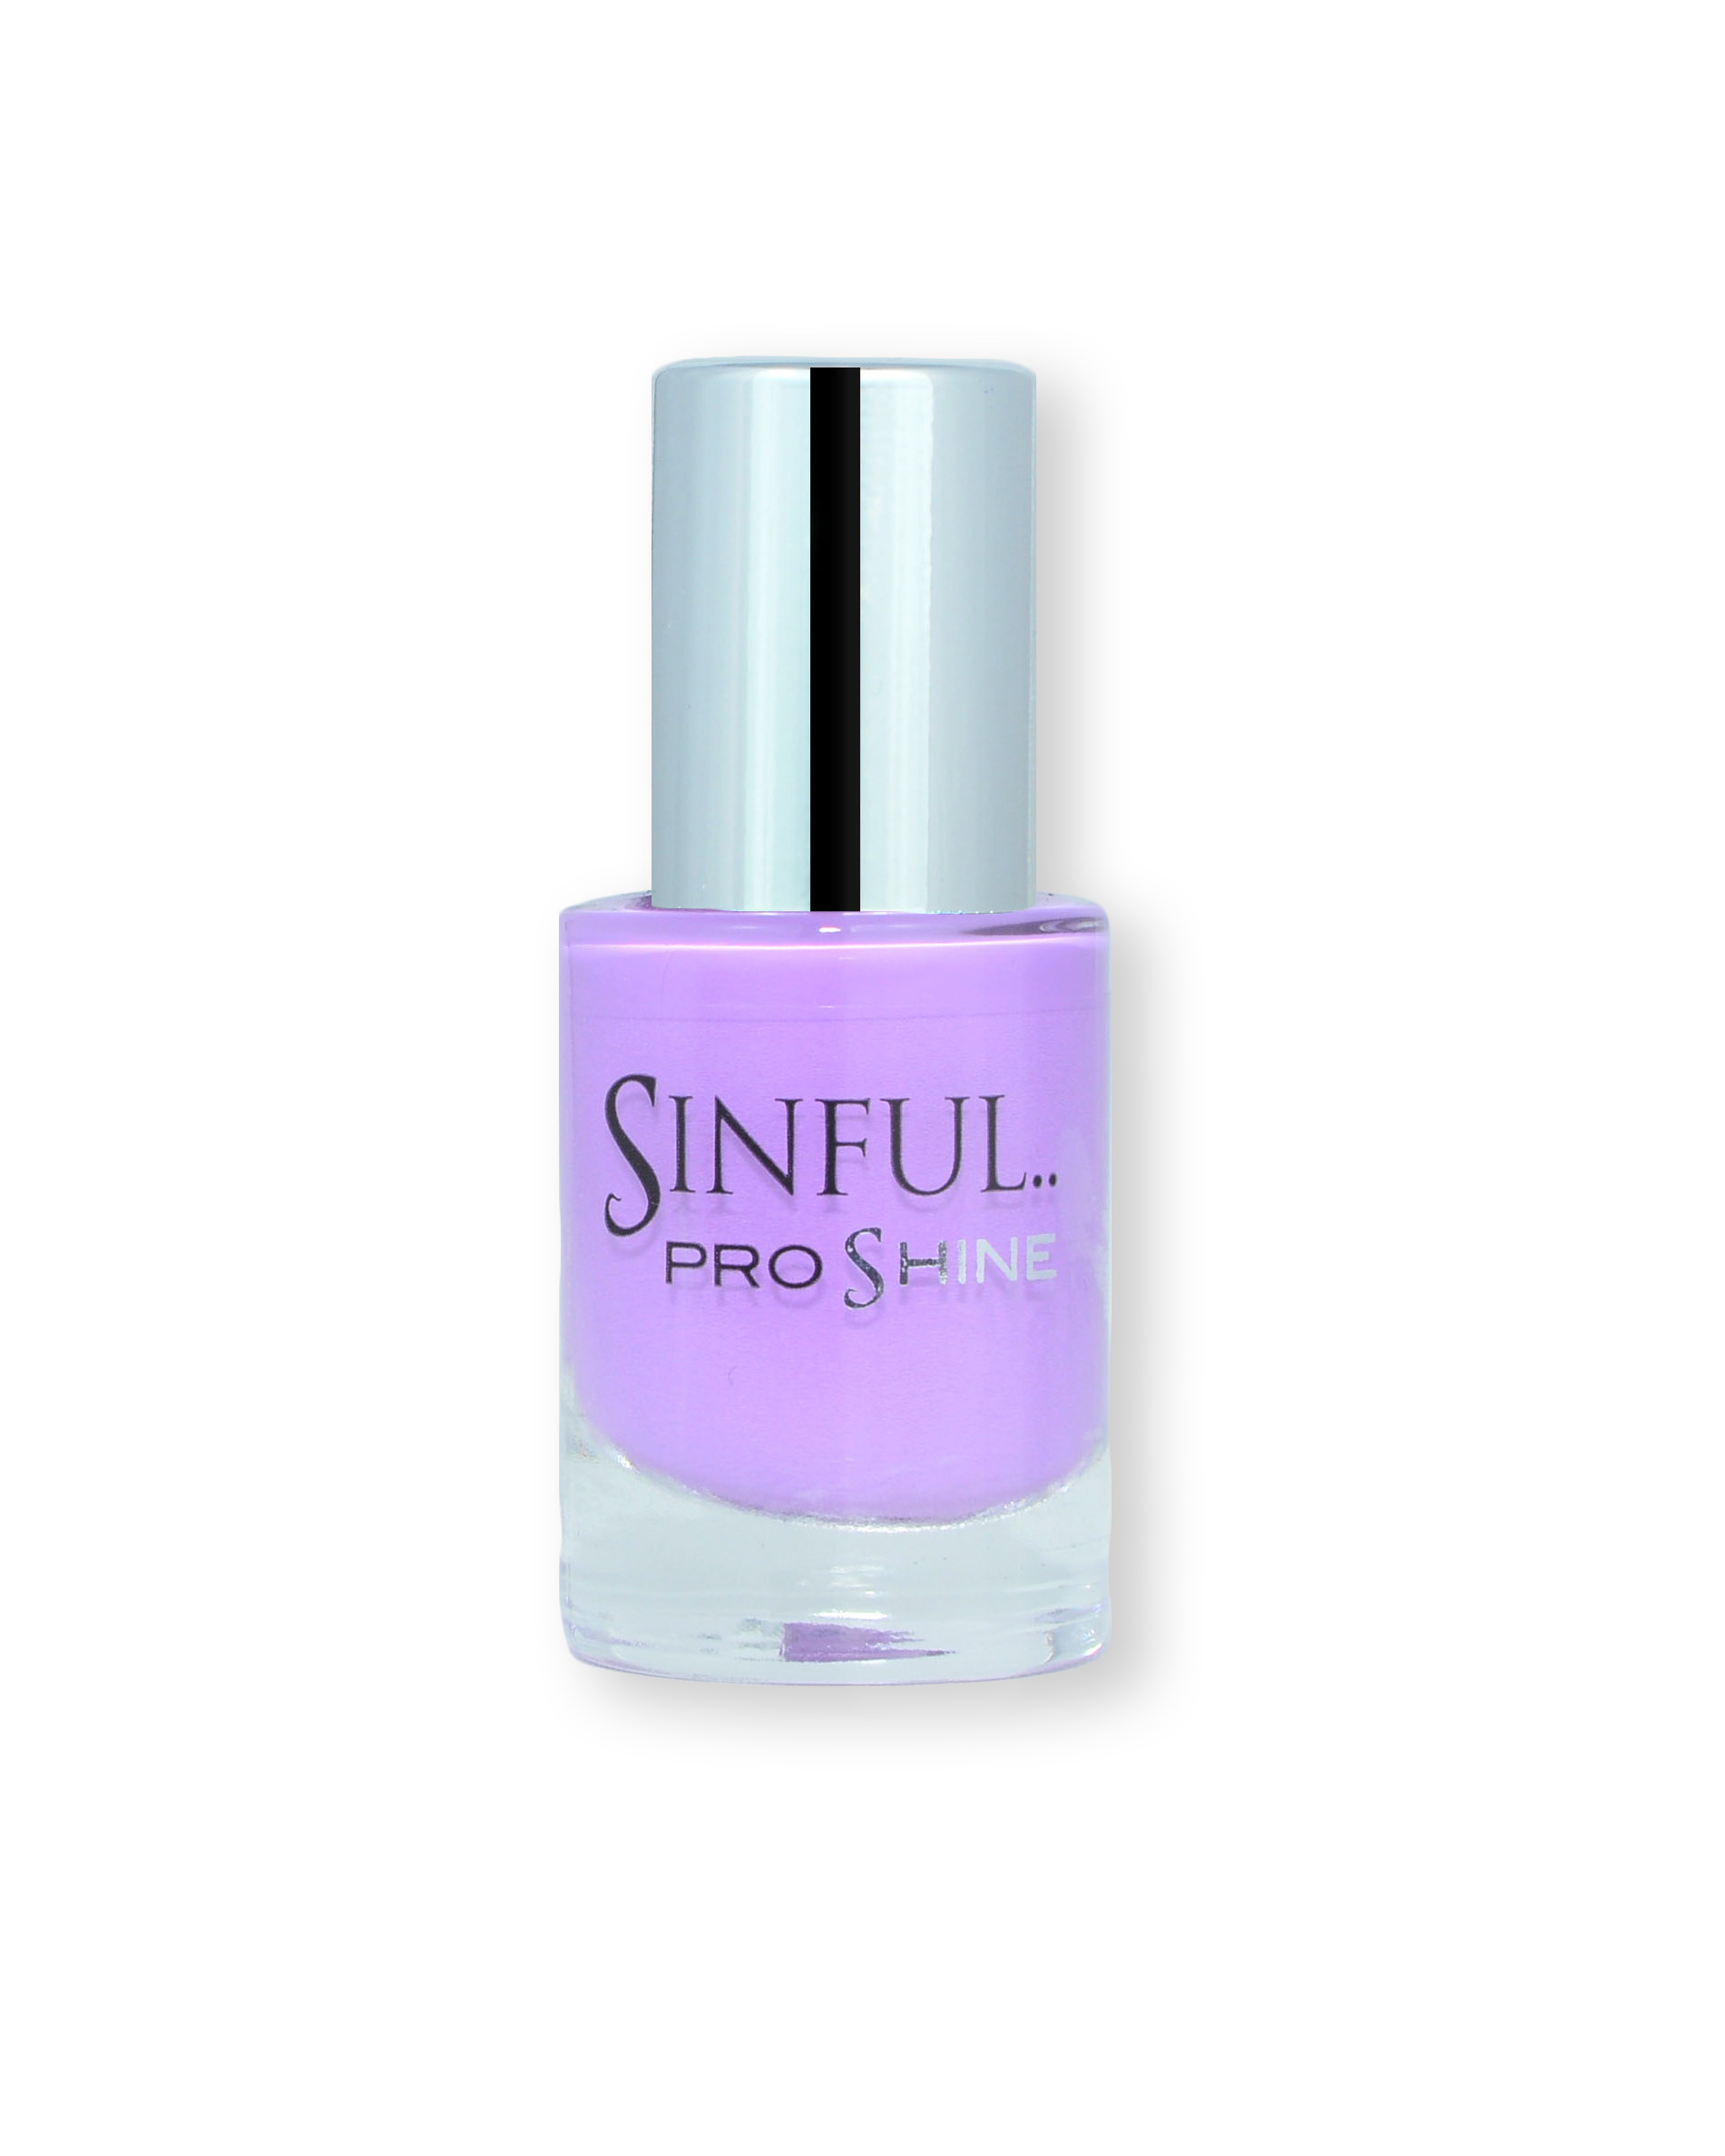 Sinful PROshine is a revolution into top spec imitation gel-like formula, easy application, full coverage and a sleek finish. Spoil yourself with the choice of 42 shades, expertly formulated with the finest grade of pigments. Mademoiselle: Rich lilac with a creme finish